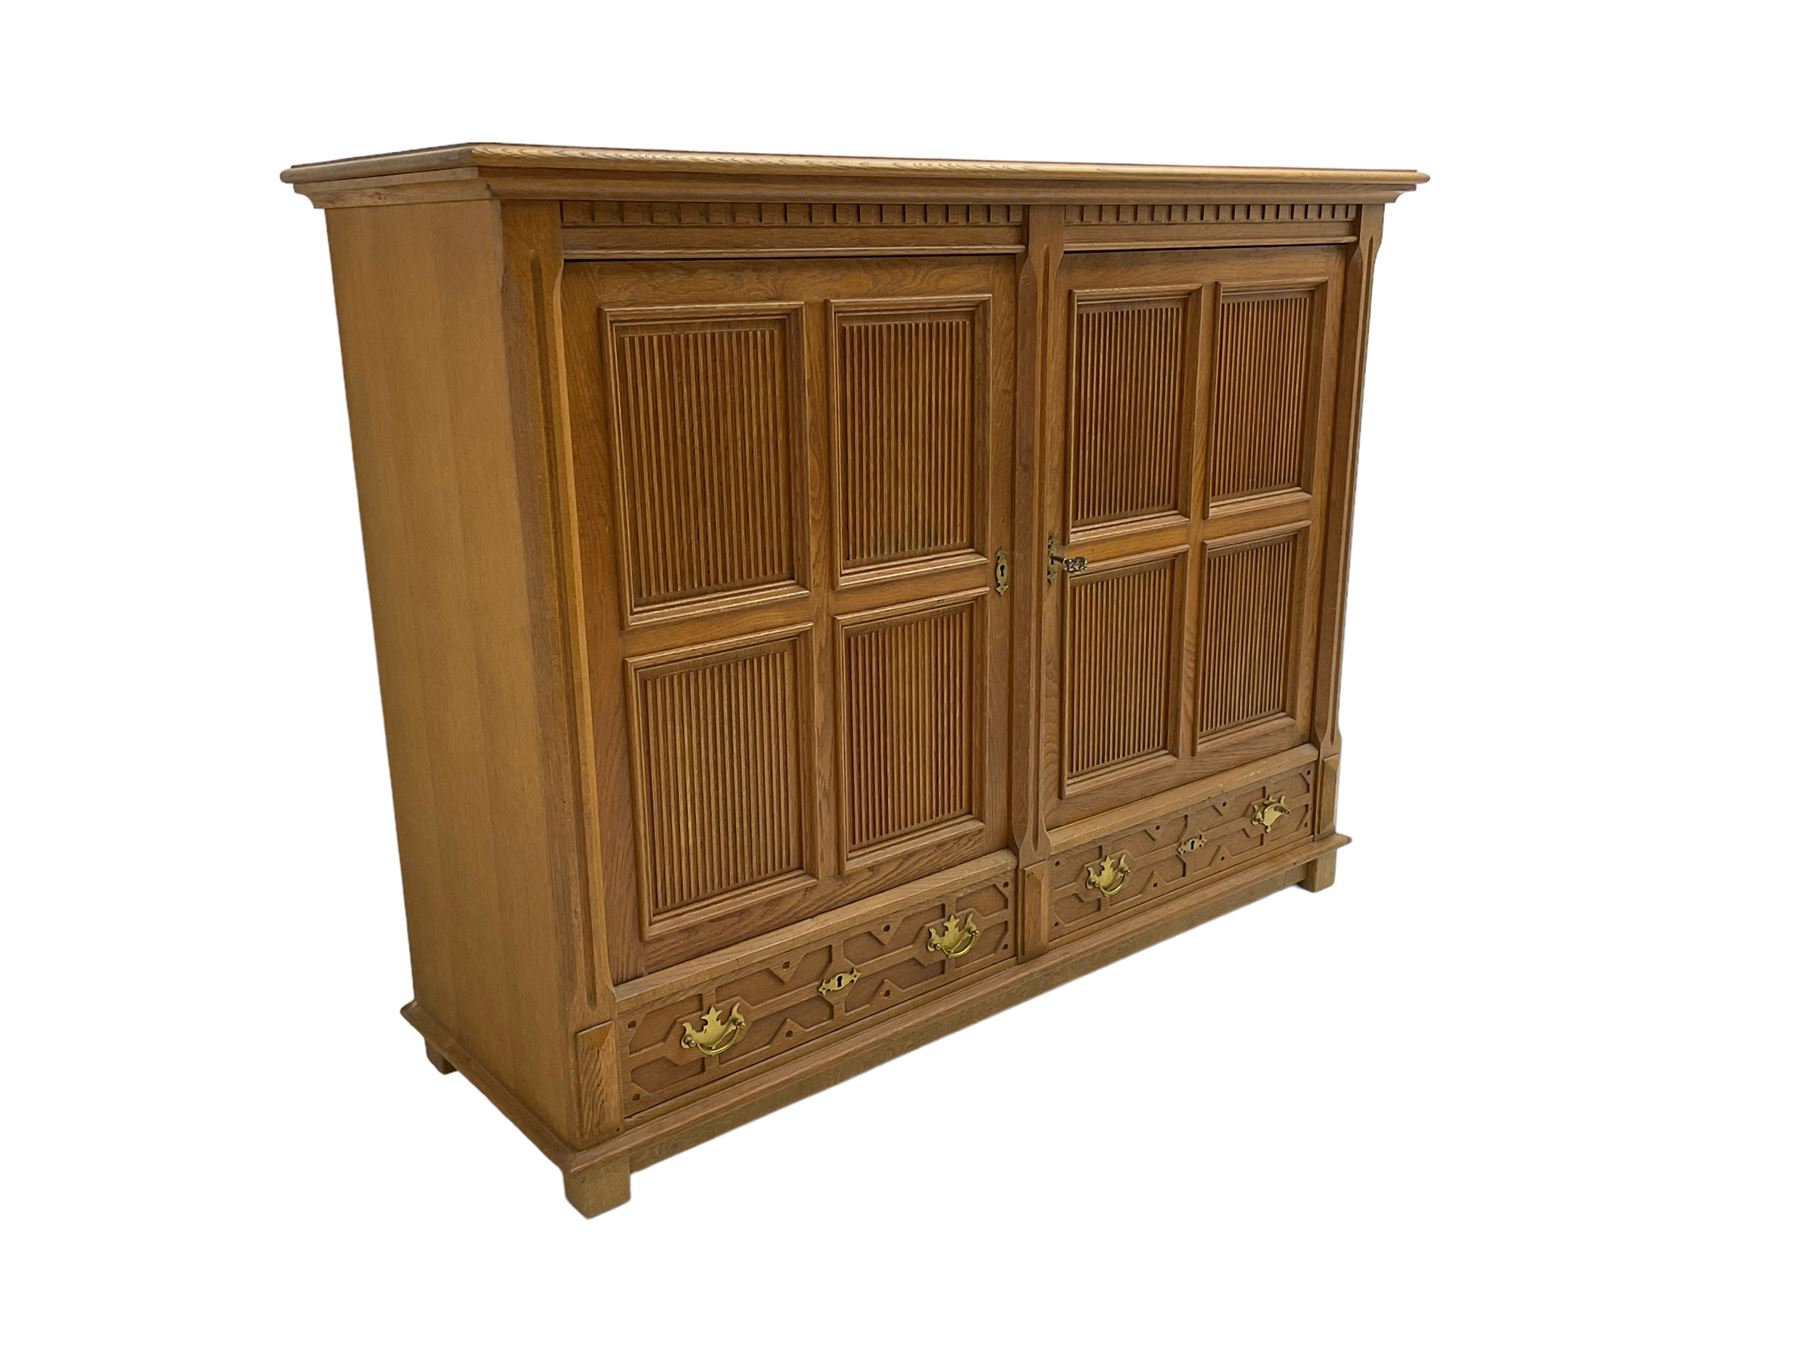 Continental 20th century carved oak cabinet - Image 3 of 6